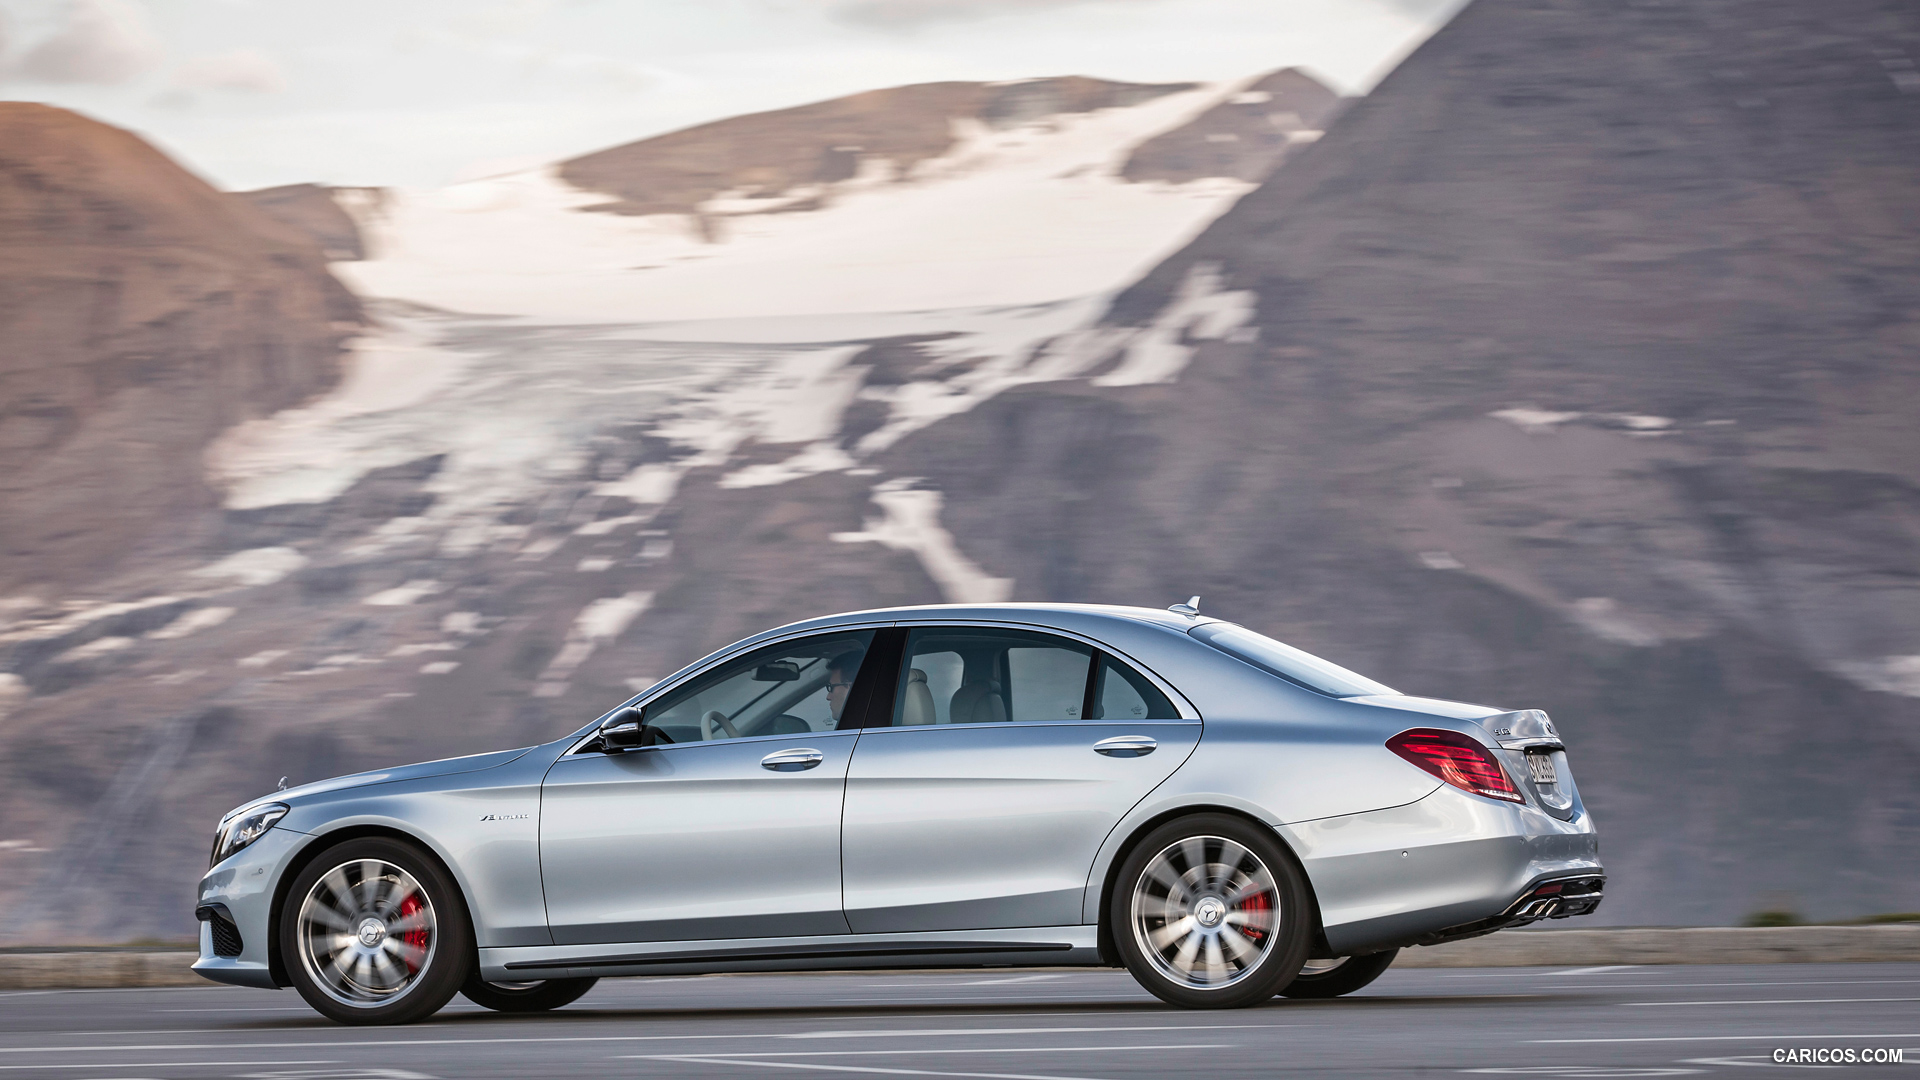 Mercedes-Benz S63 AMG W222 (2014)  - Side, #17 of 102